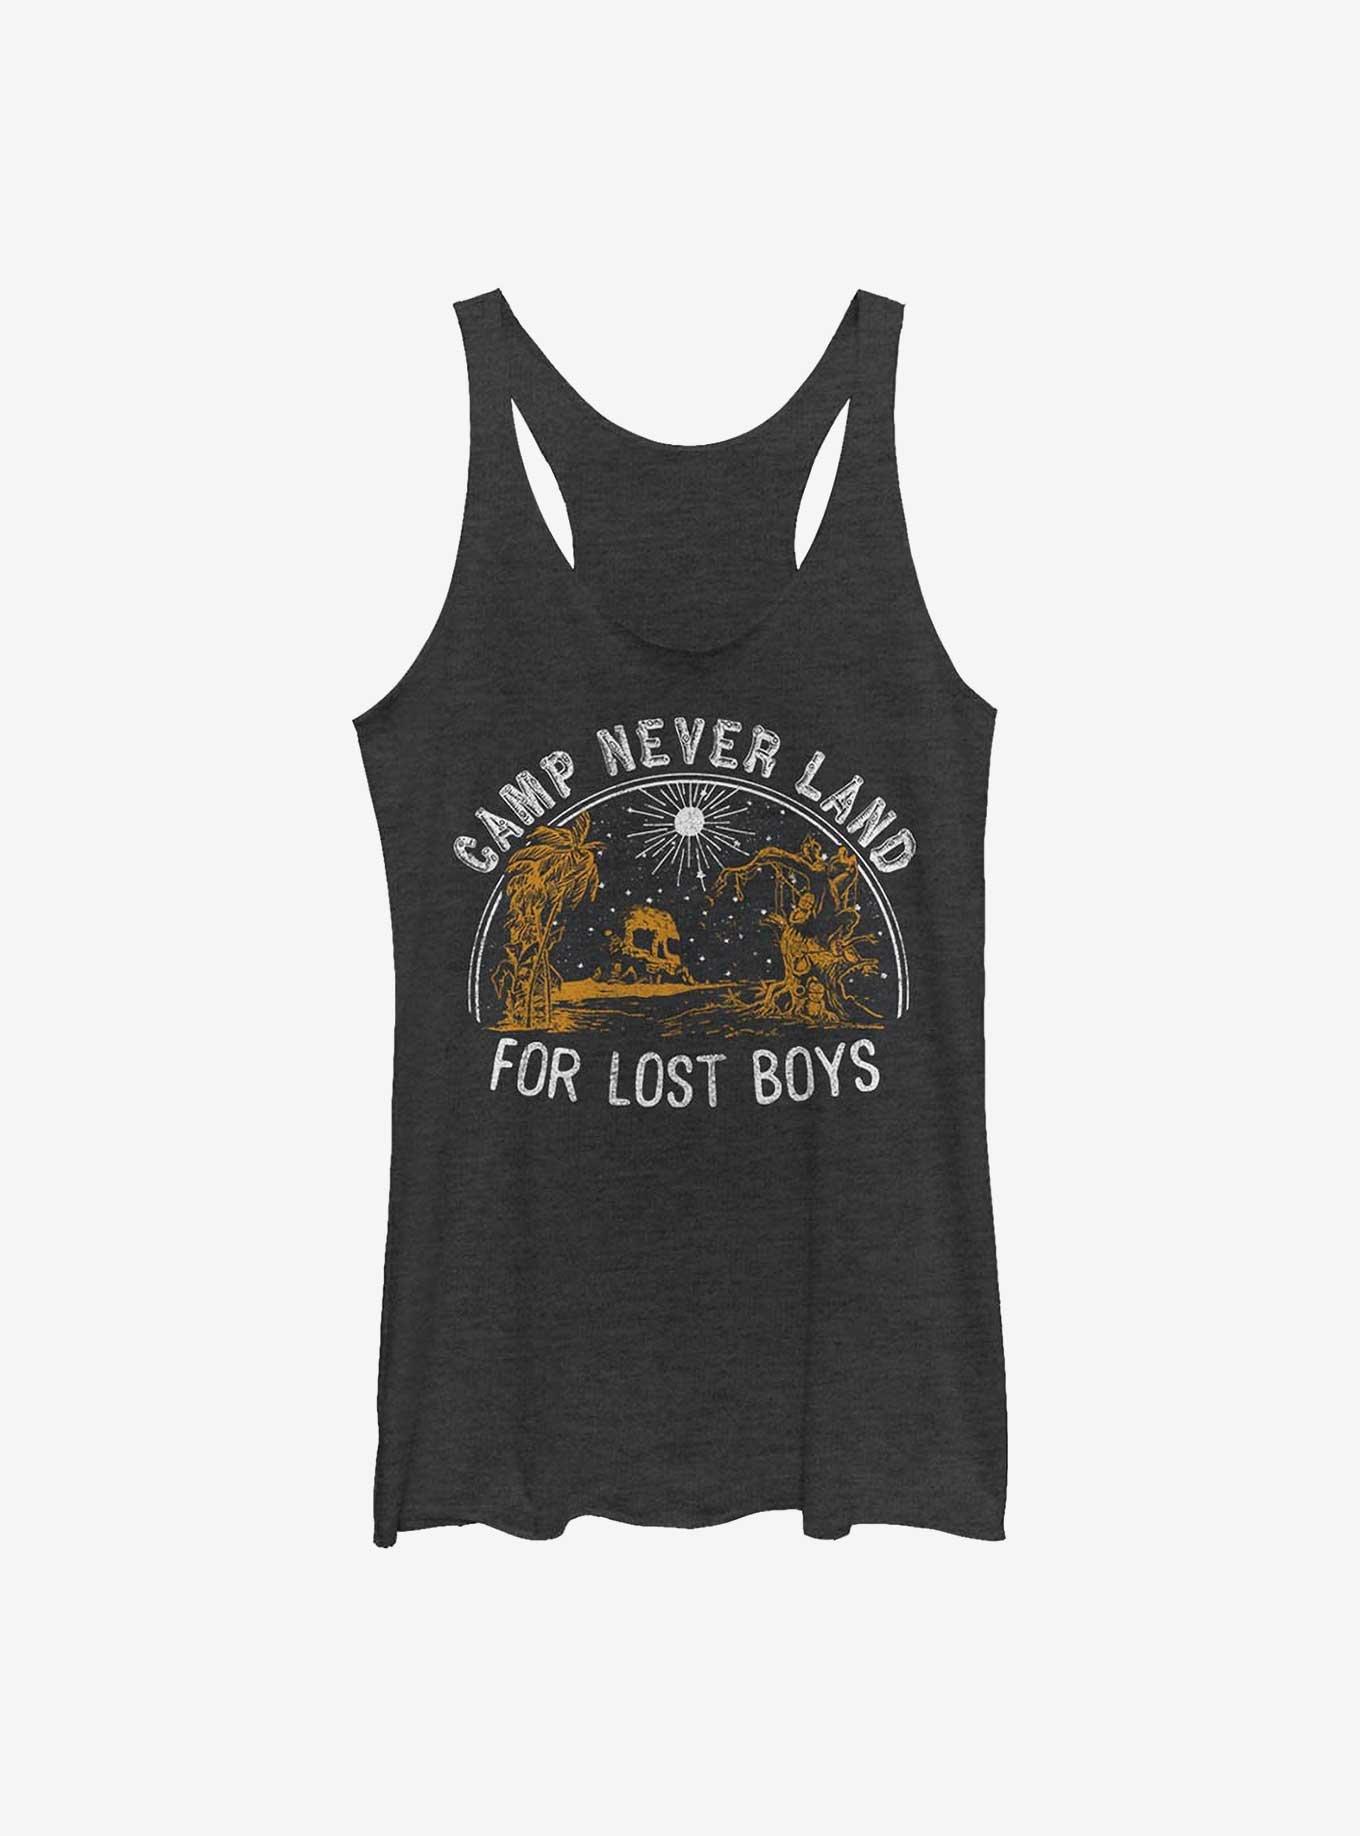 Disney Peter Pan Camp Never Land For Lost Boys Girls Tank